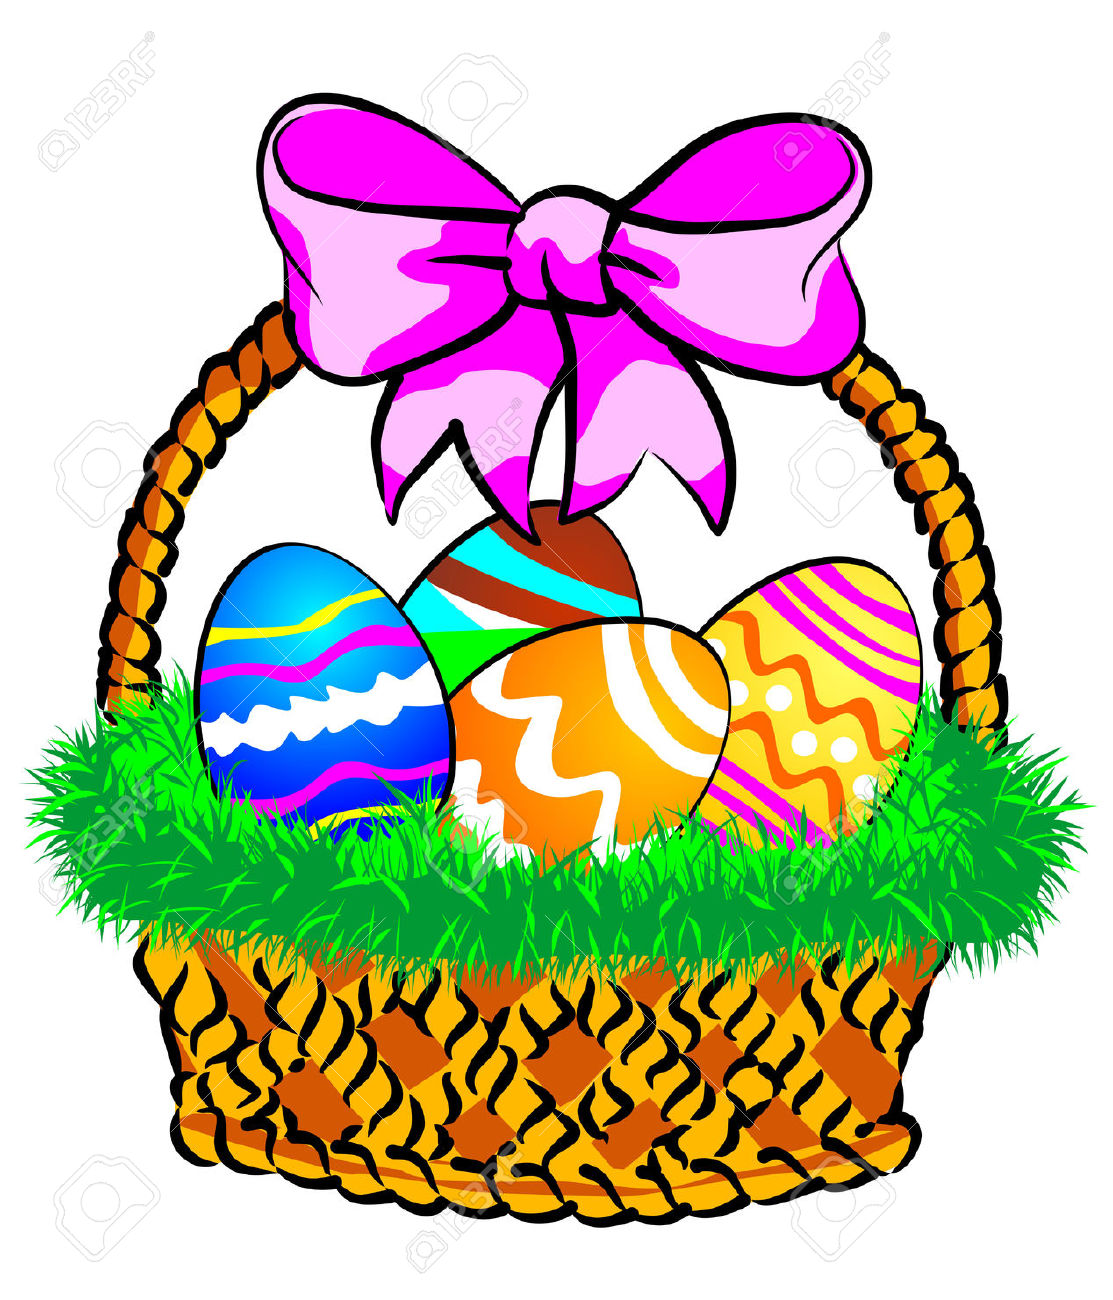 free clipart easter basket with eggs - photo #46